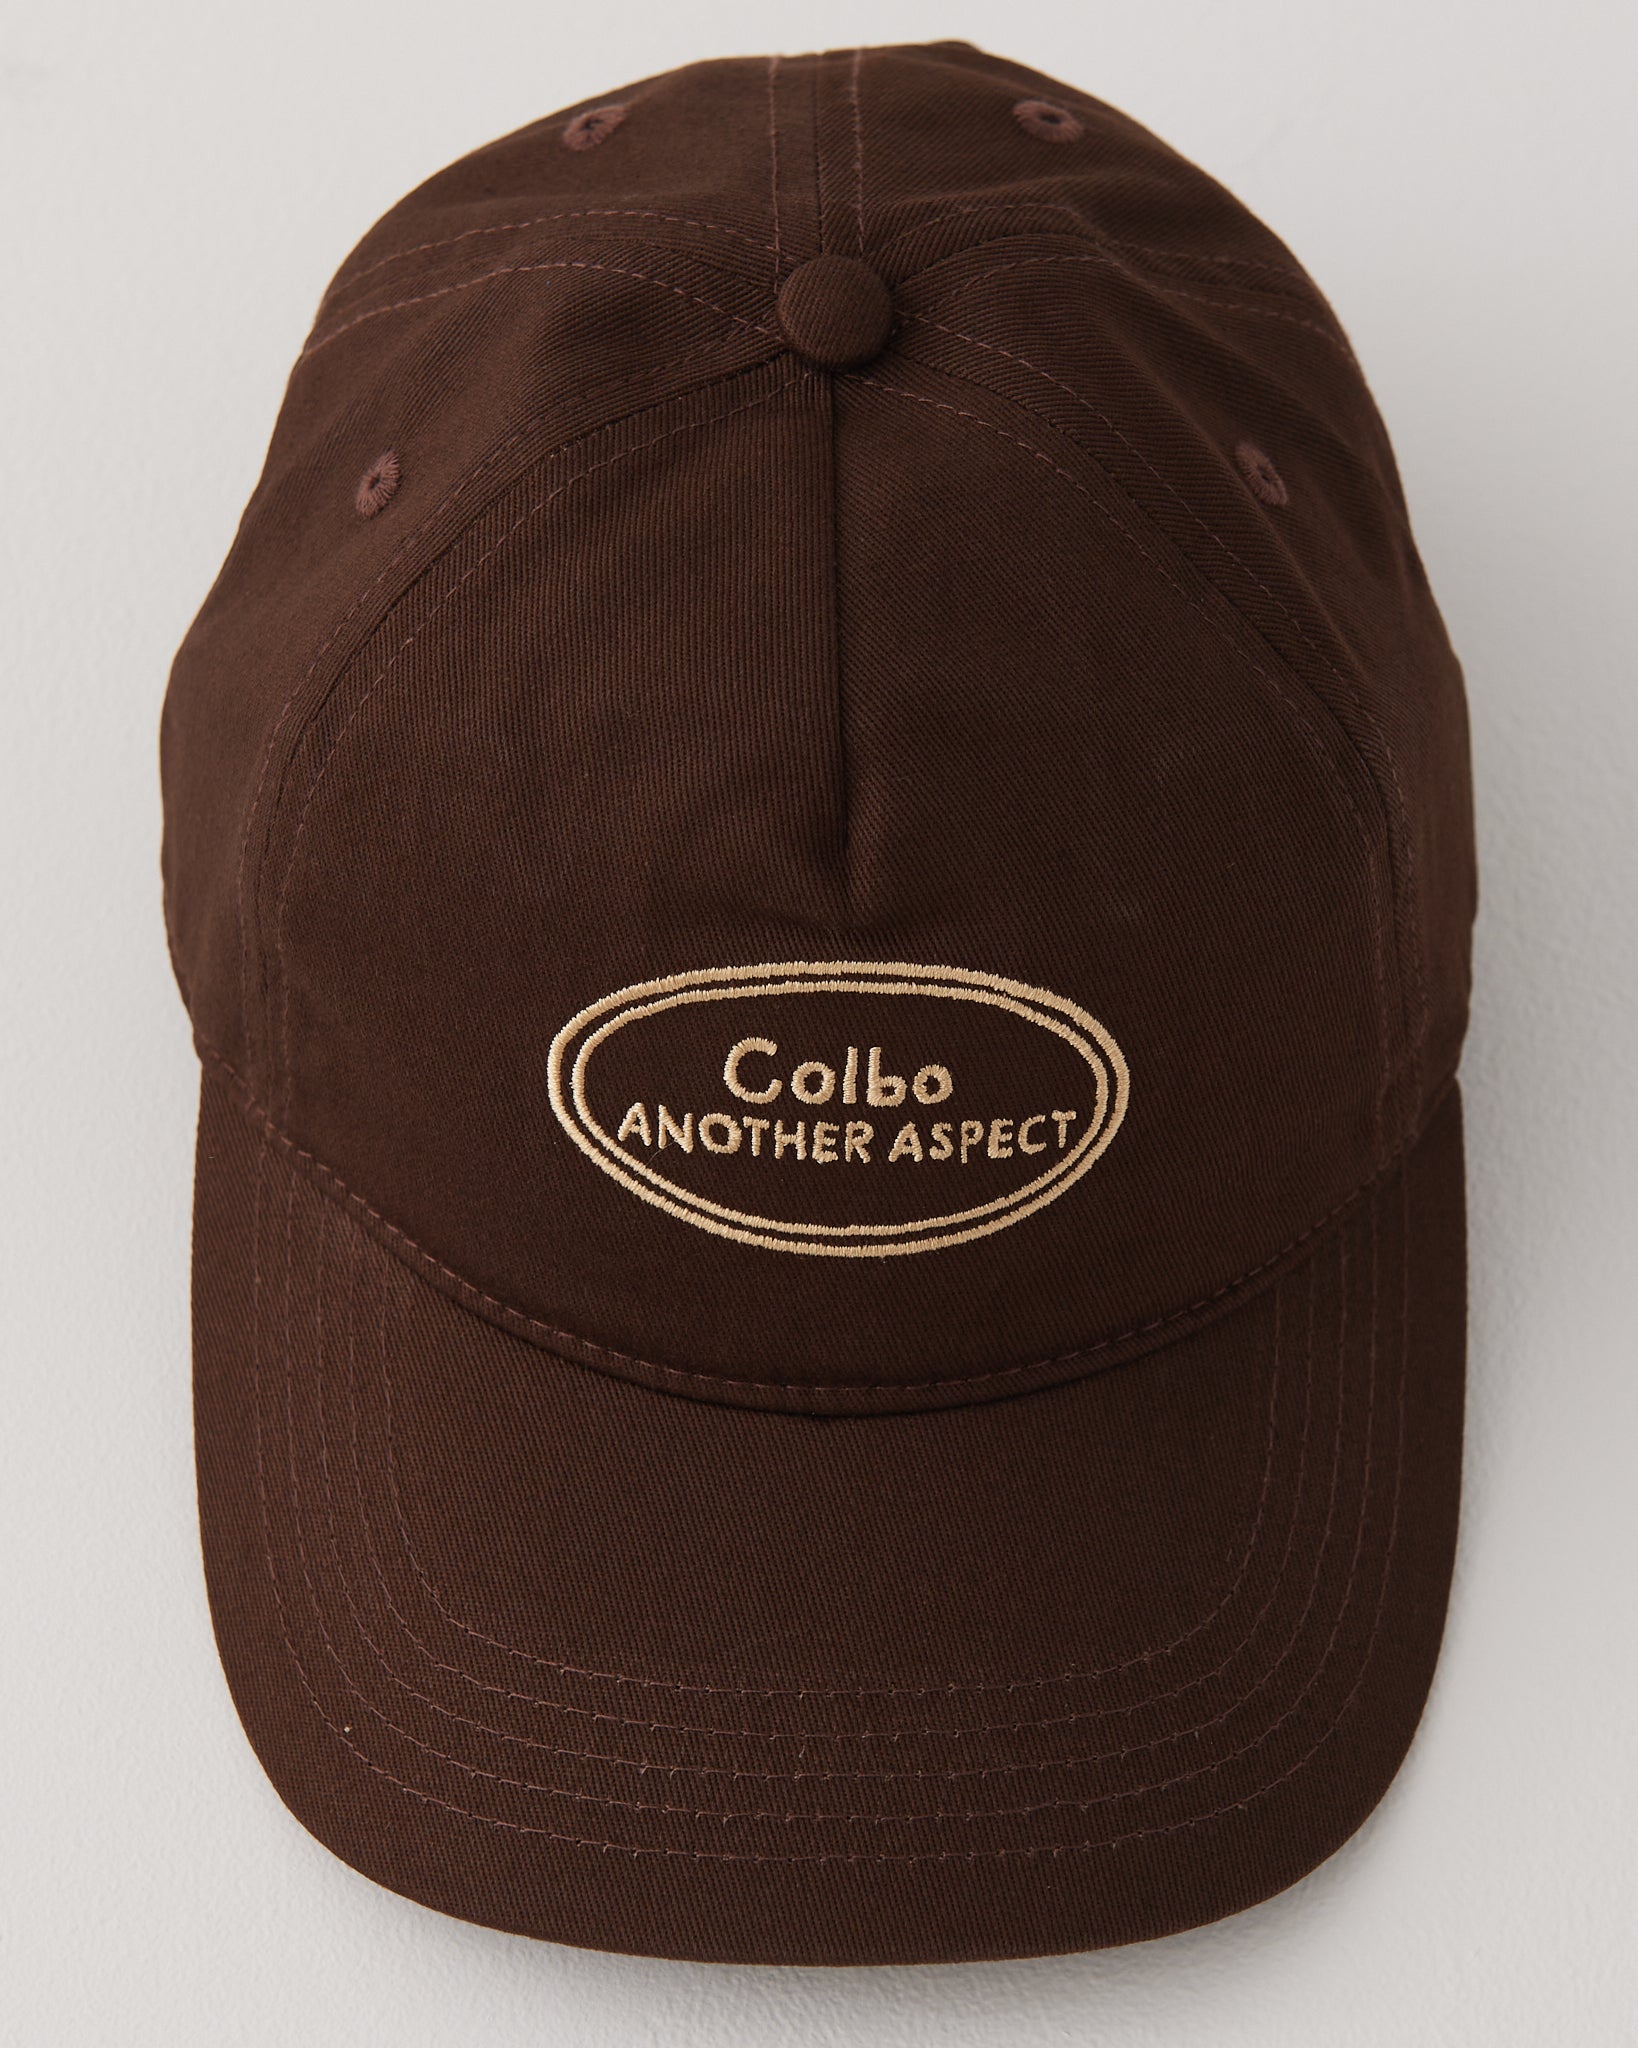 Another Aspect x Colbo Cap 2.0